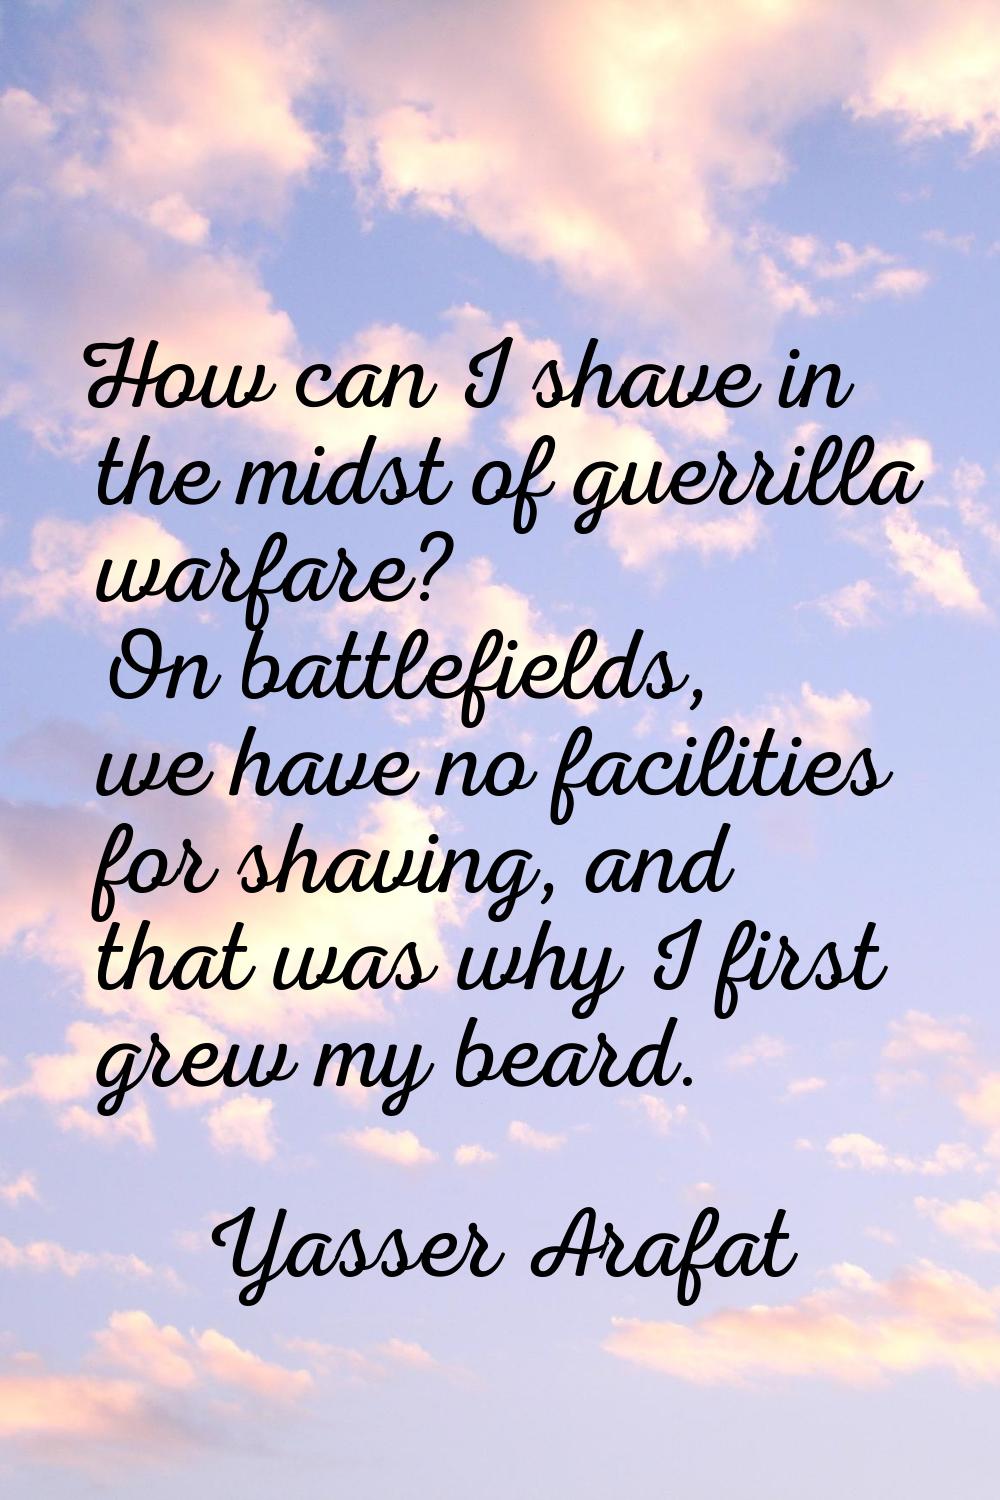 How can I shave in the midst of guerrilla warfare? On battlefields, we have no facilities for shavi